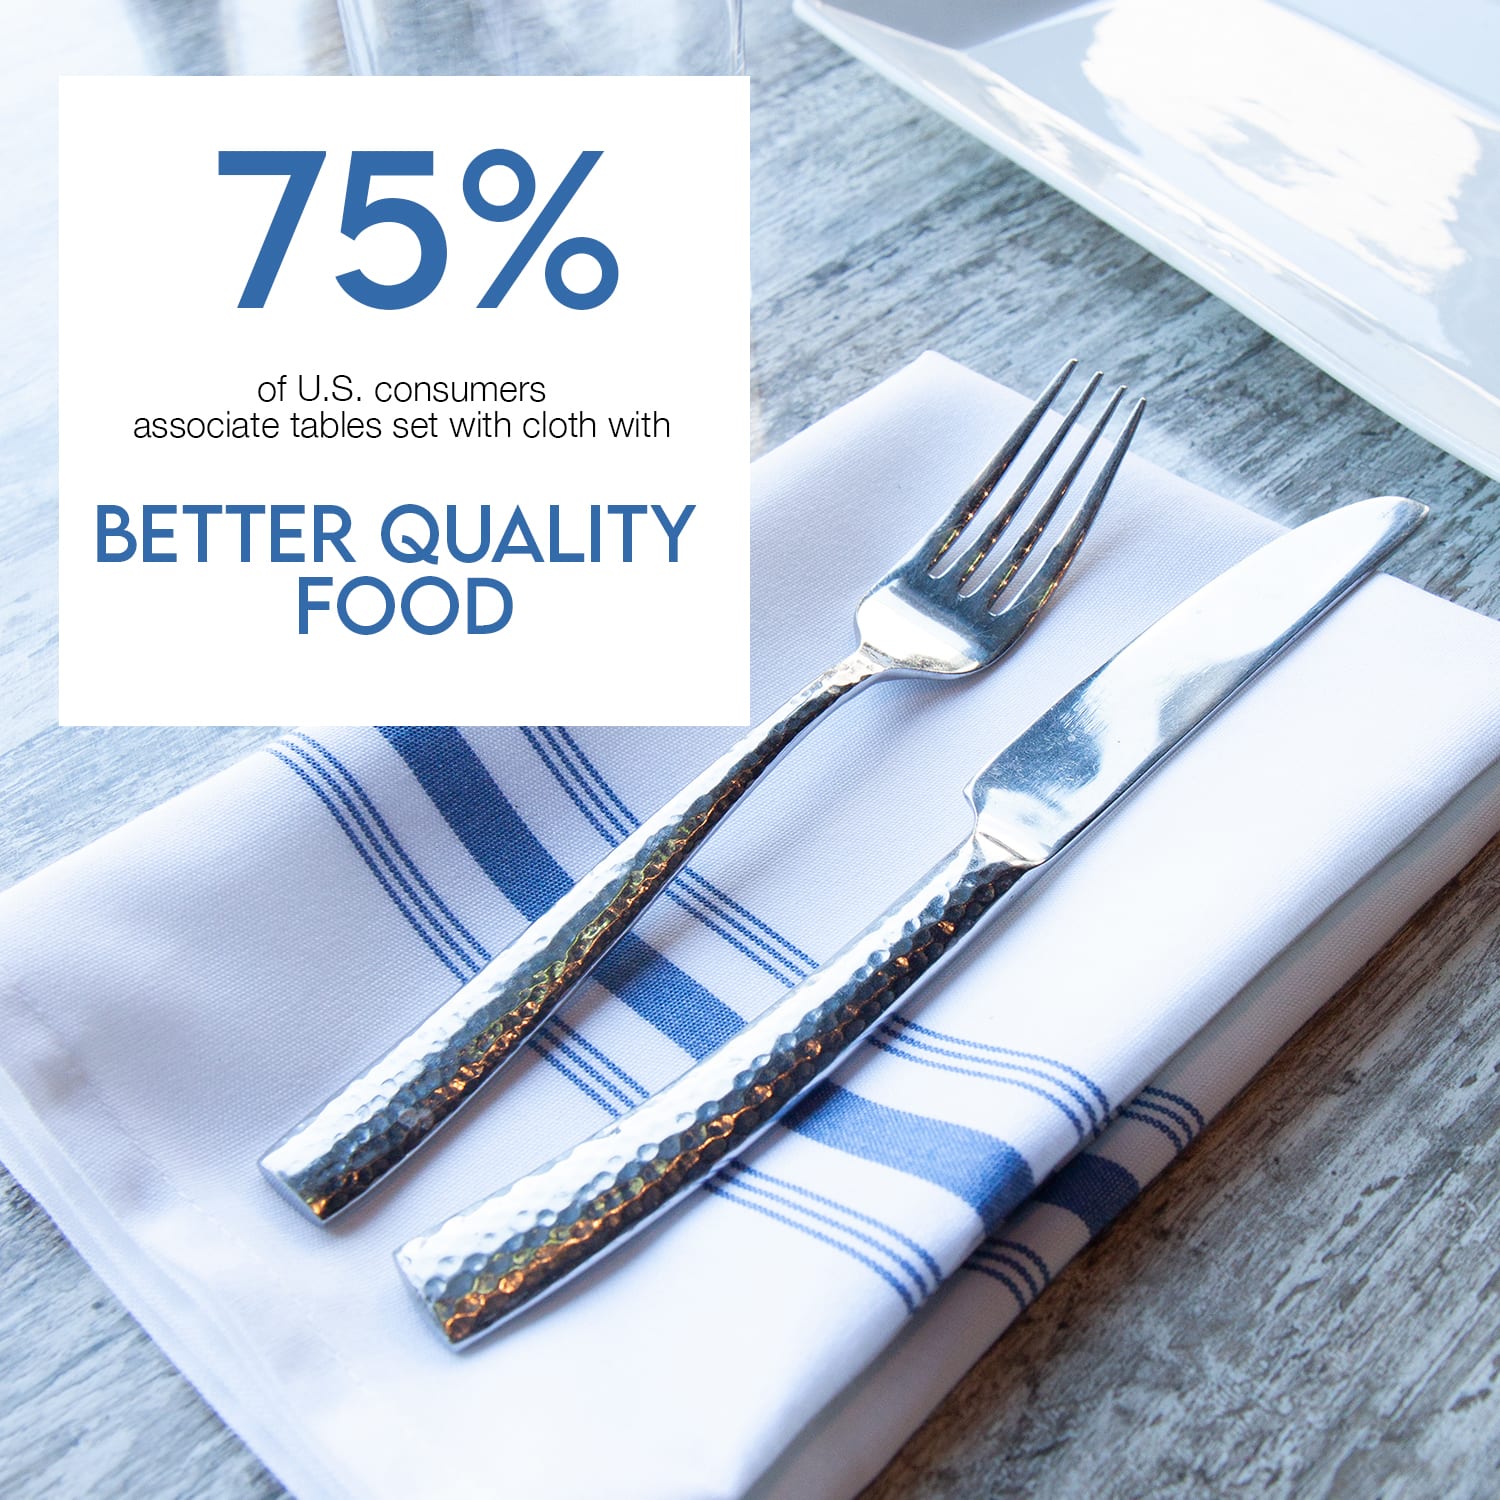 18x22, 12 Pack Arkwright Bistro Dinner Napkins Blue Professional Restaurant Quality Cloth Napkins with French Stripes